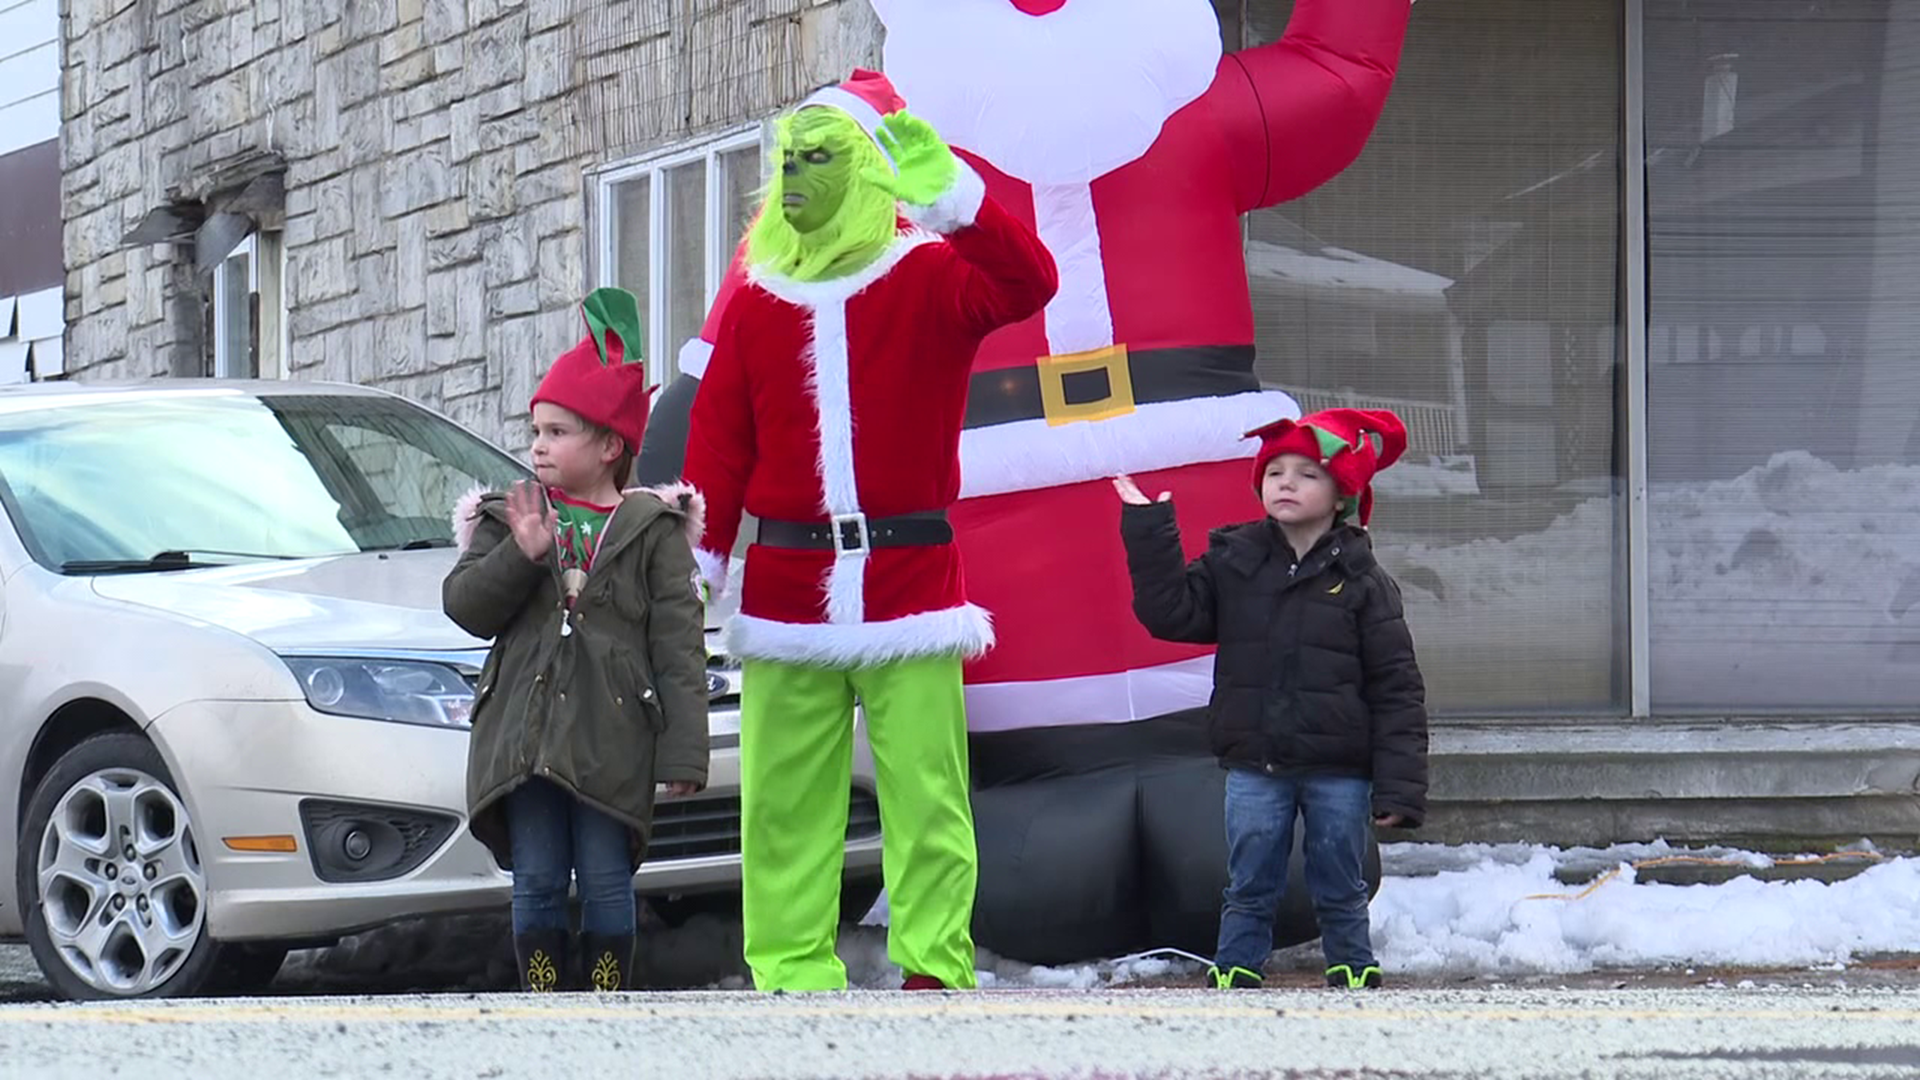 Chris Wagoner's daughter recently pitched an idea to her dad. To stand on the corner outside their home in a Grinch costume and wave to people driving by.